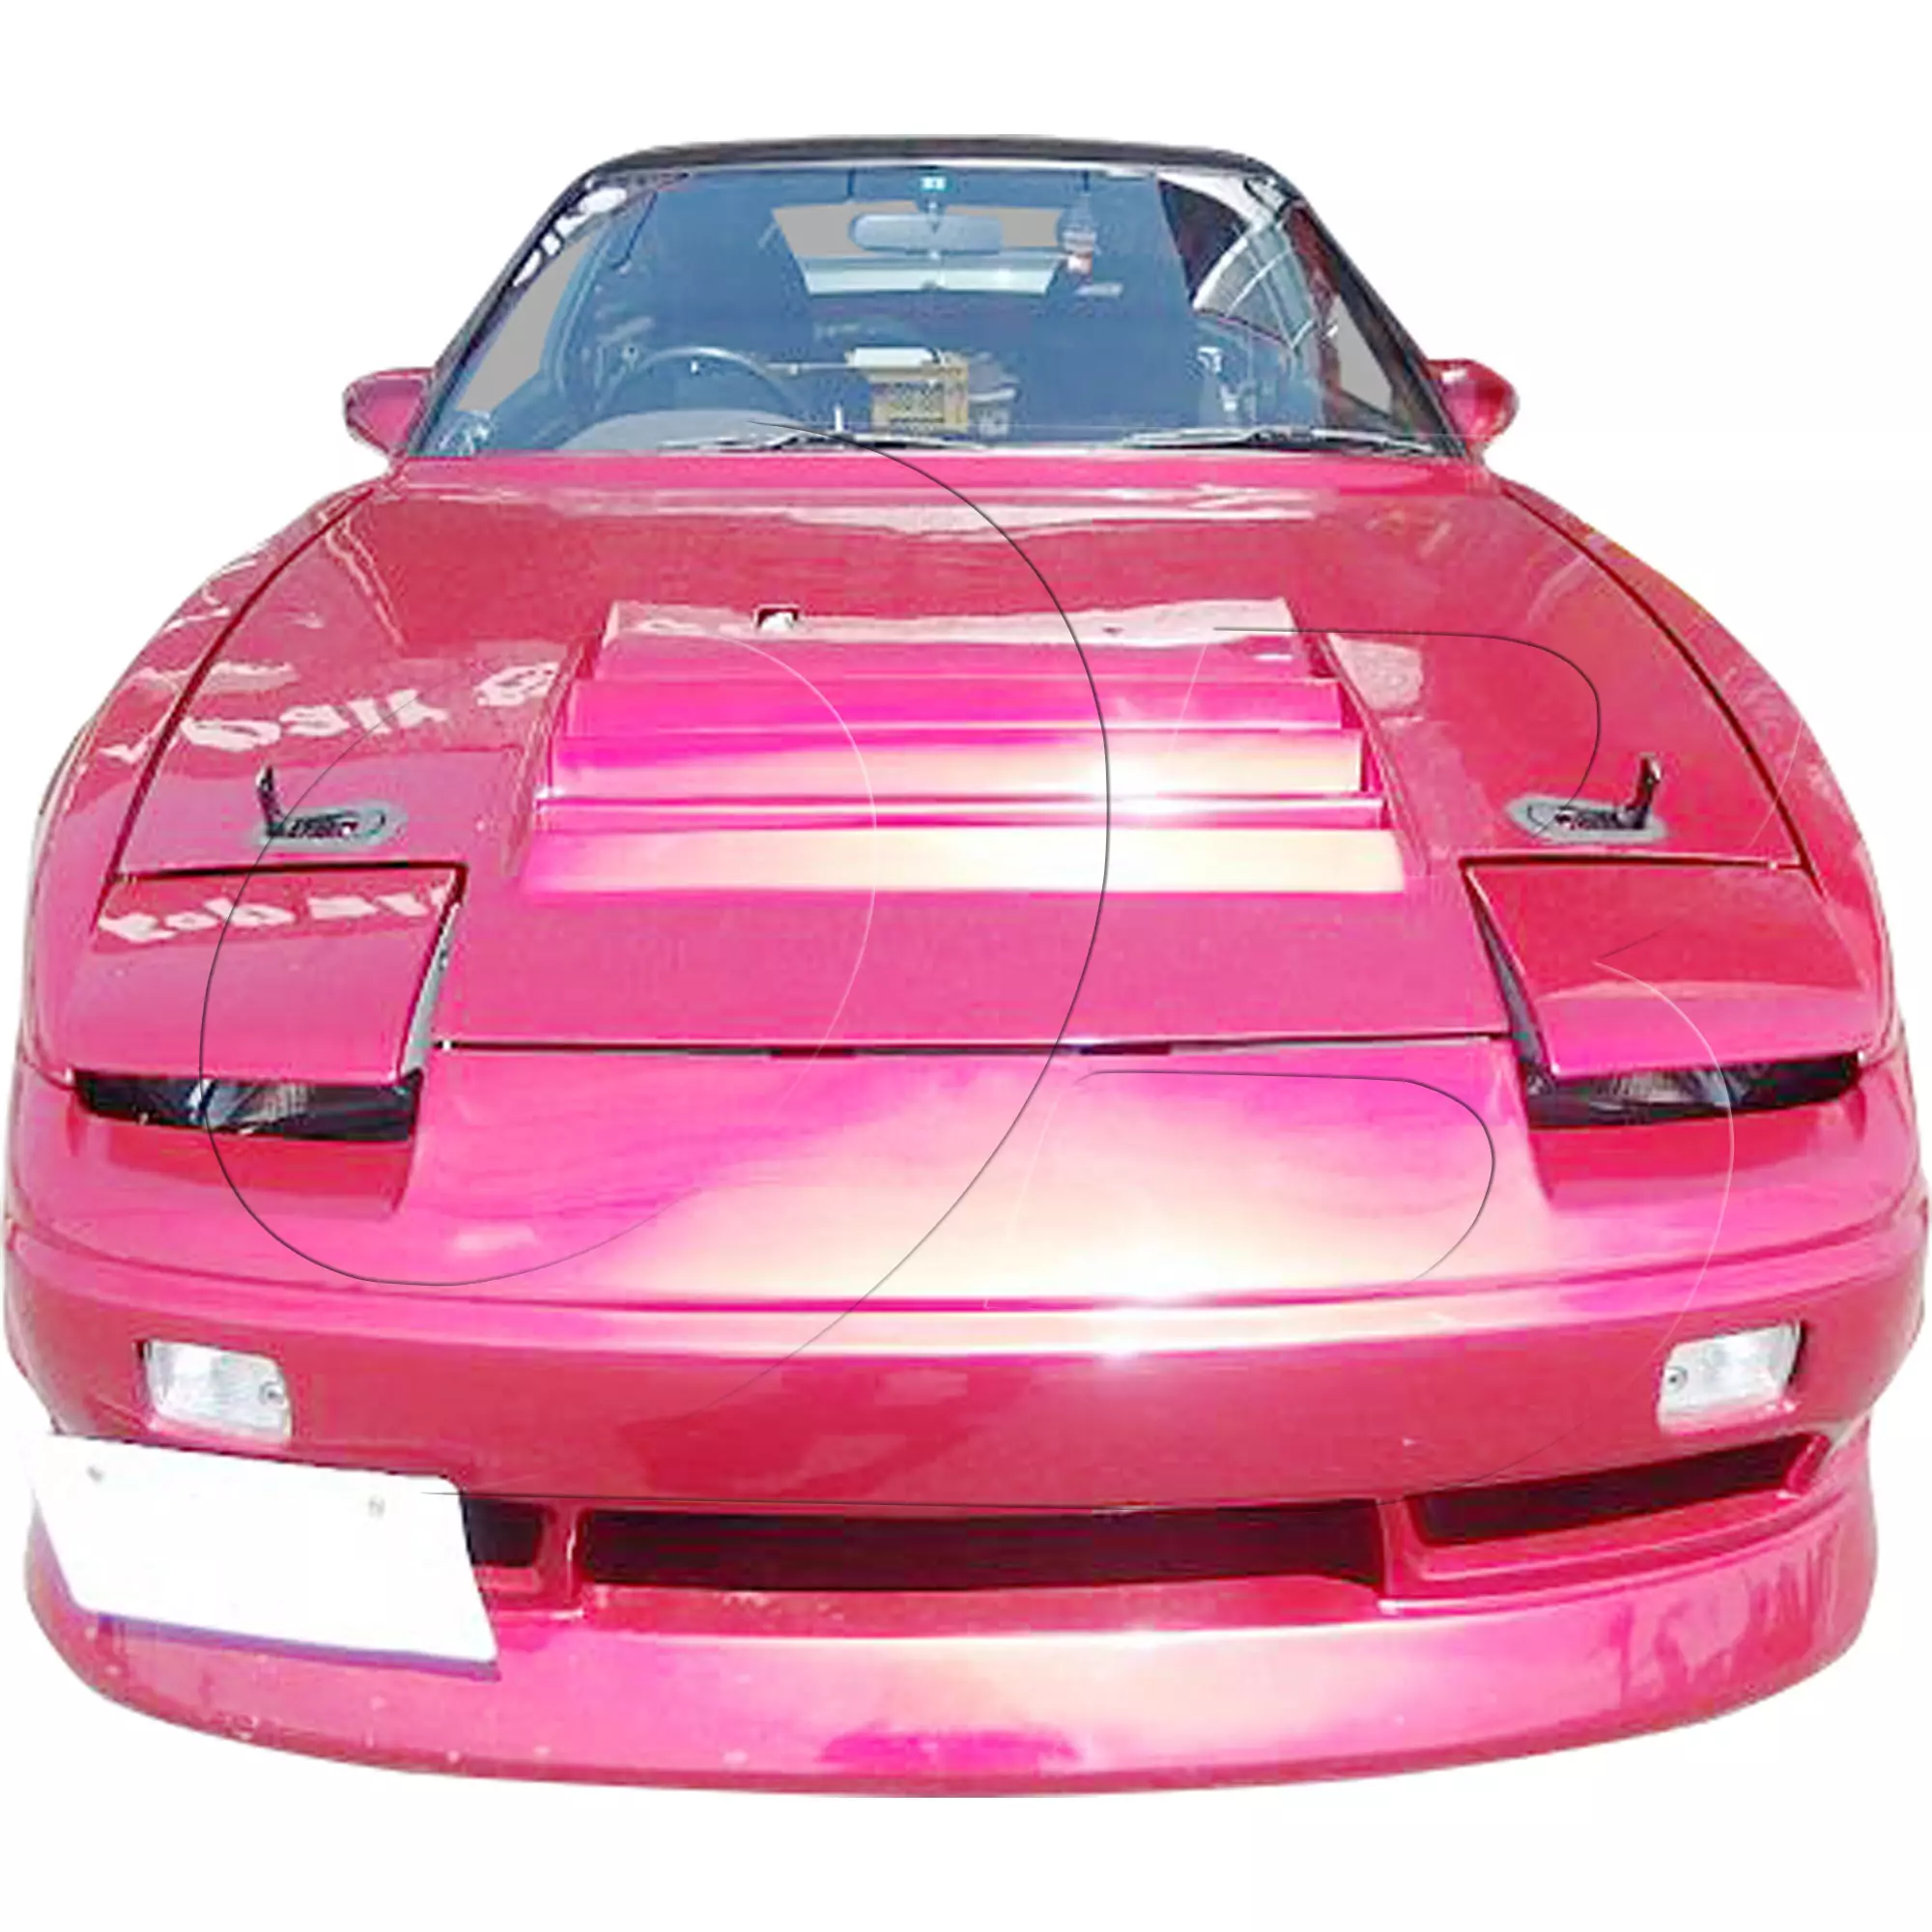 KBD Urethane Bsport2 Style 4pc Full Body Kit > Nissan 240SX 1989-1994 > 2dr Coupe - Image 21